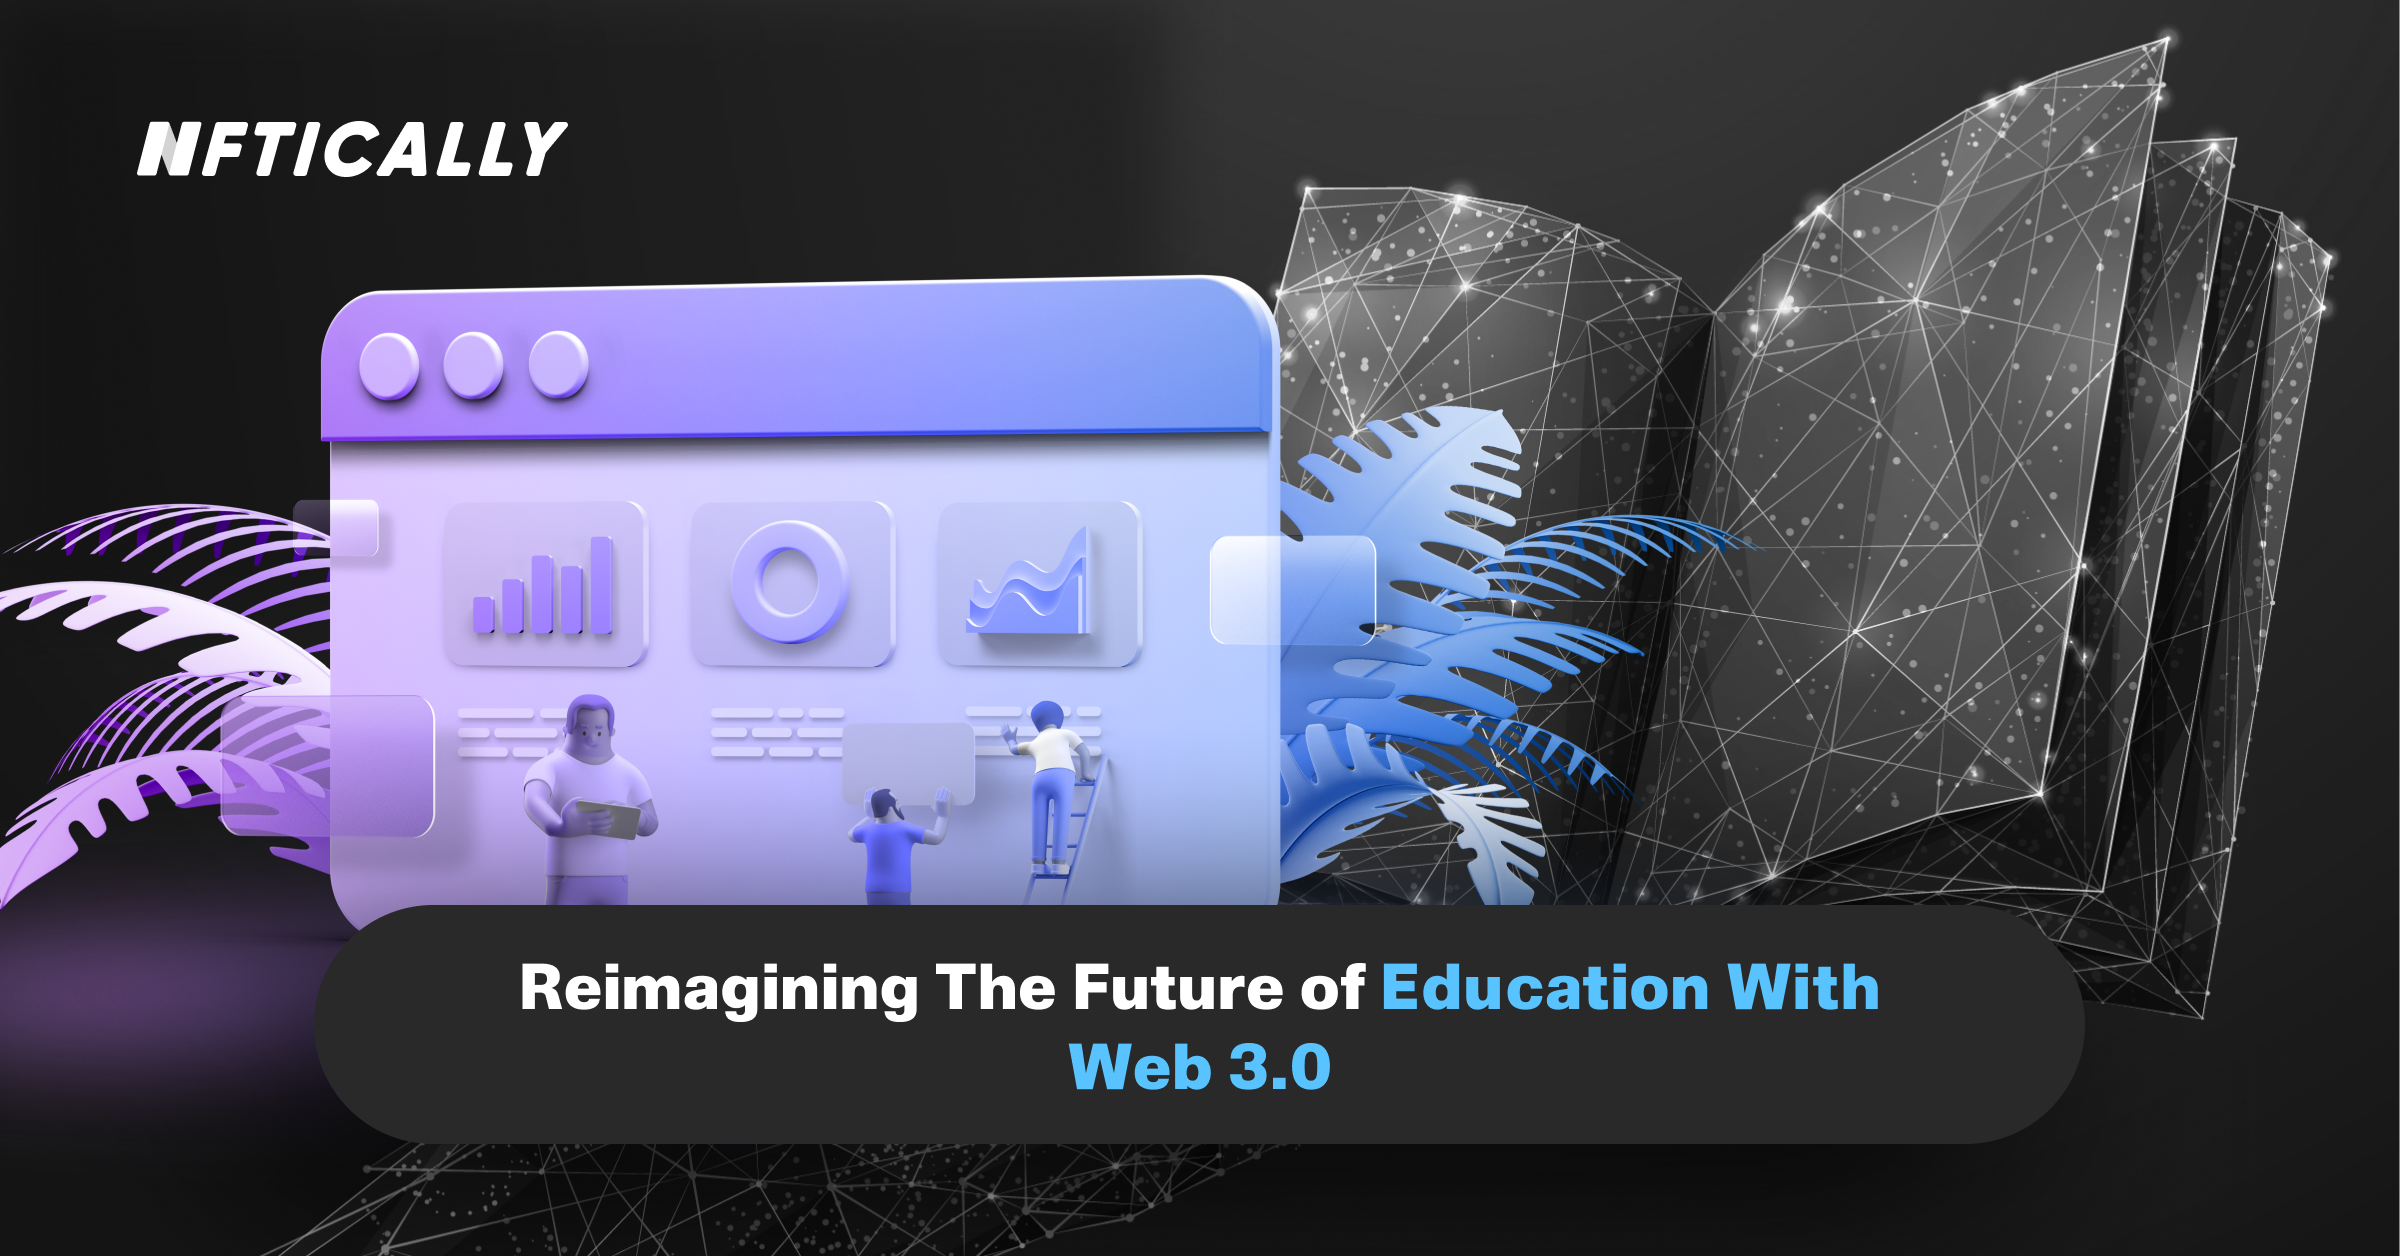 Reimagining The Future of Education With Web 3.0